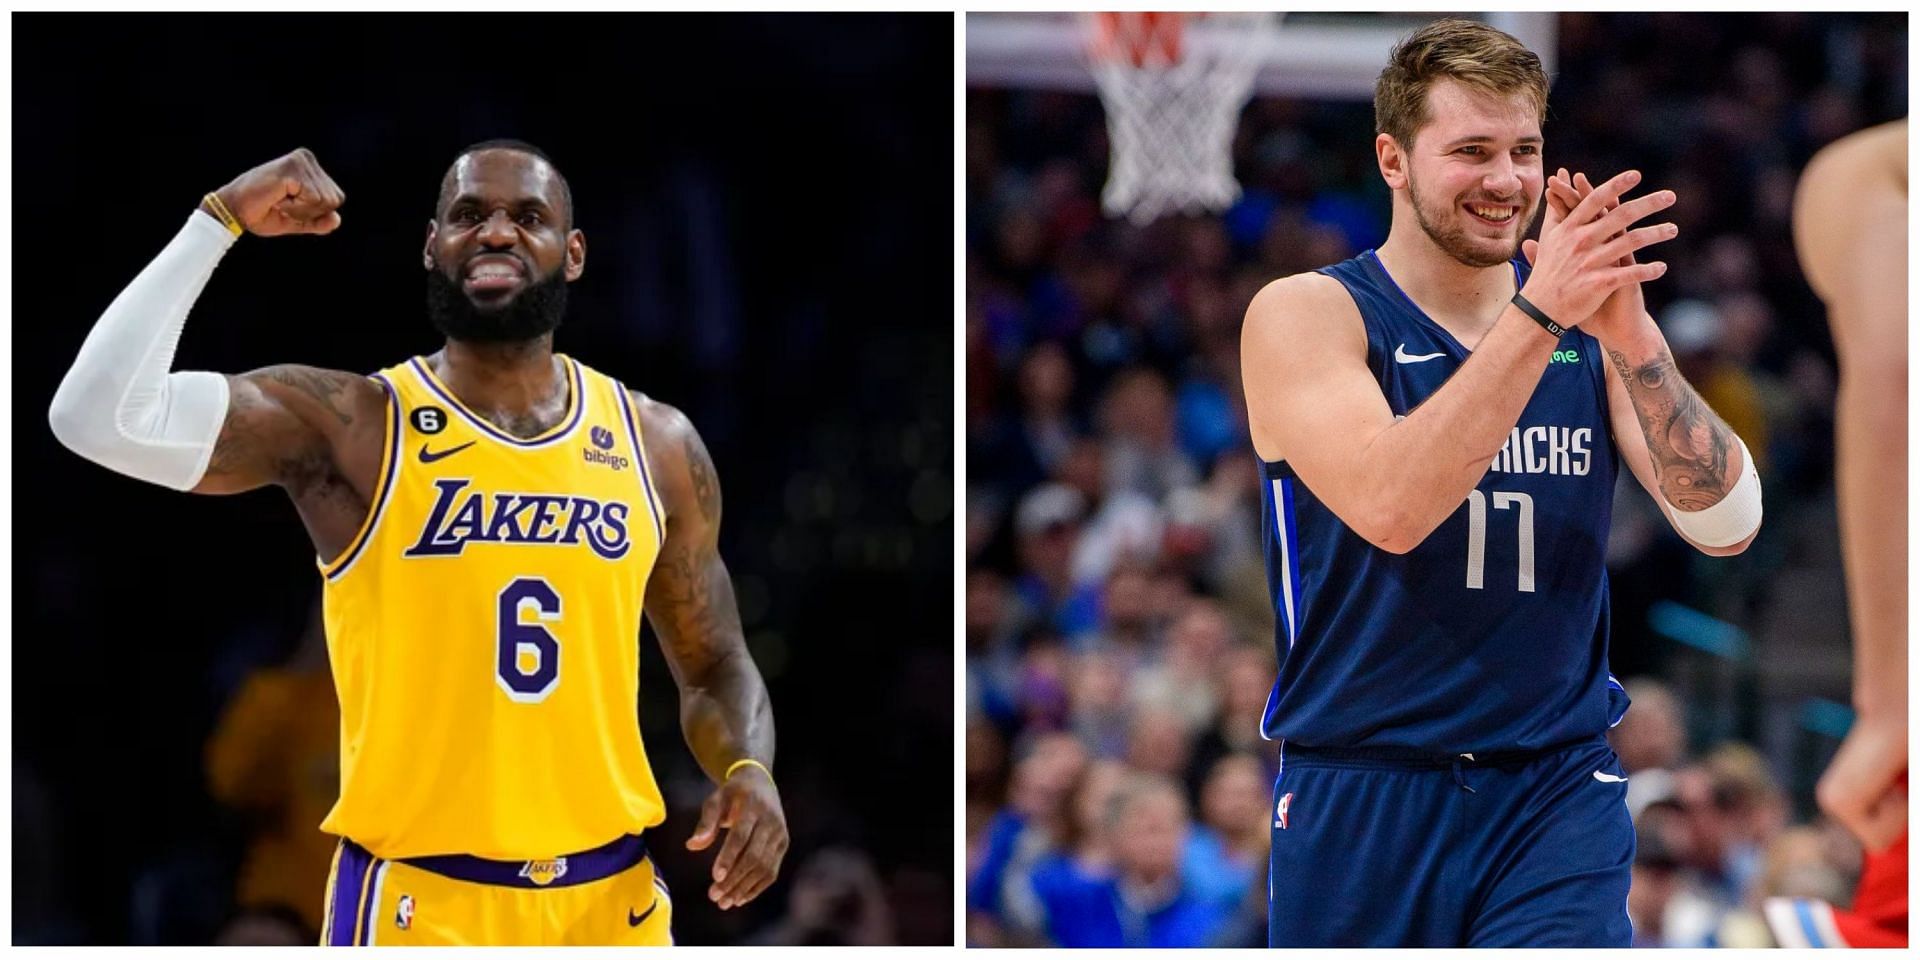 Listing the top five players from last season who scored the most points without turning the ball over, featuring LeBron James